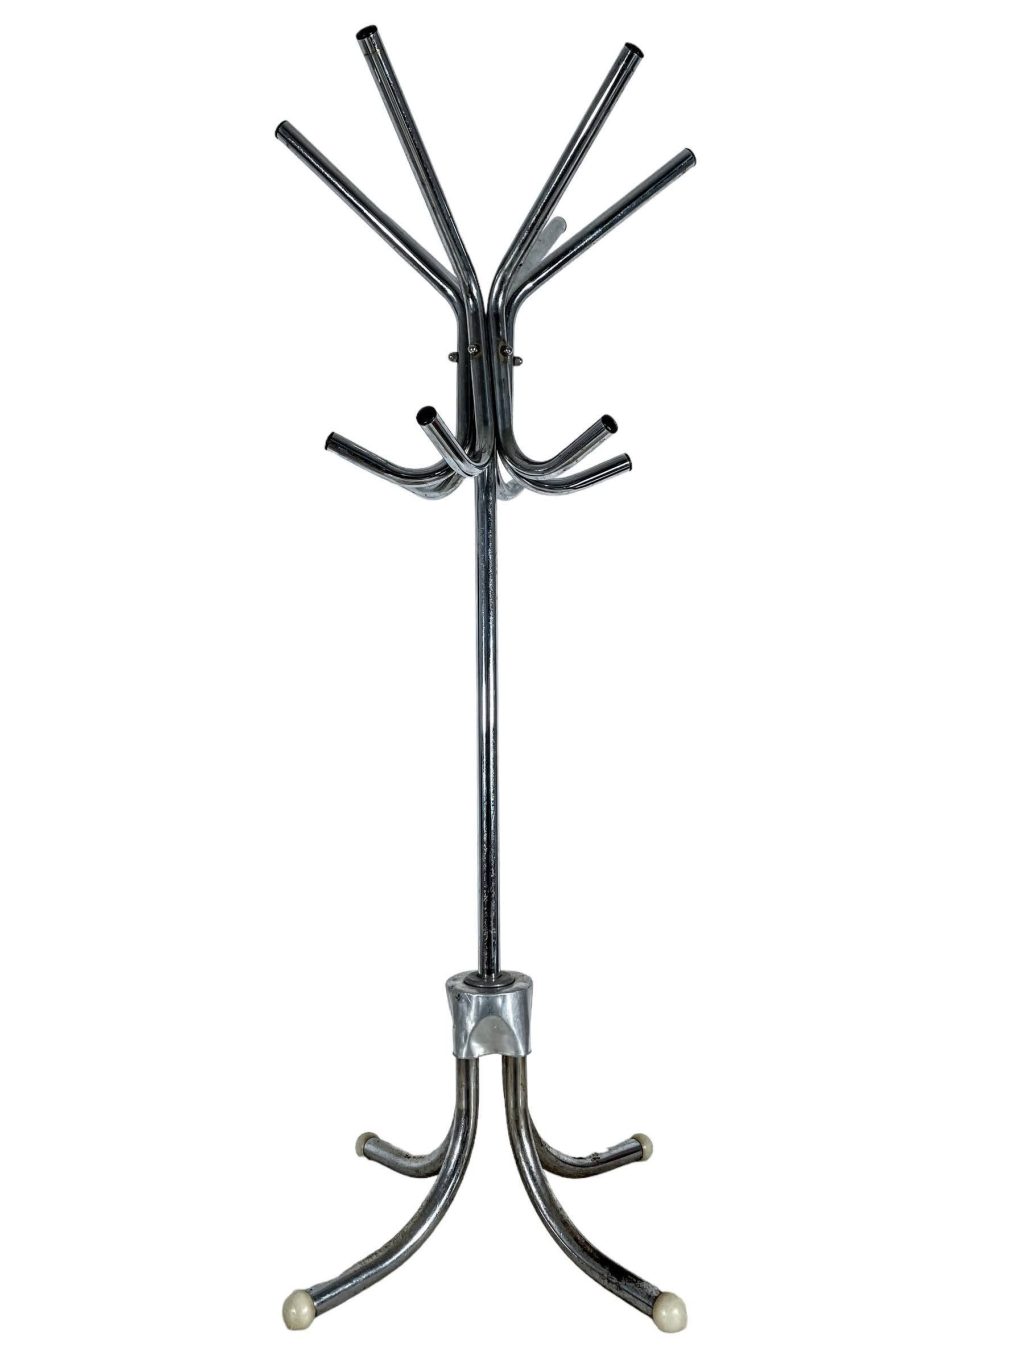 Vintage French Chrome Coat Stand Storage Mid Century Modern Standing Silver Hook Hanging Display circa 1960-70’s